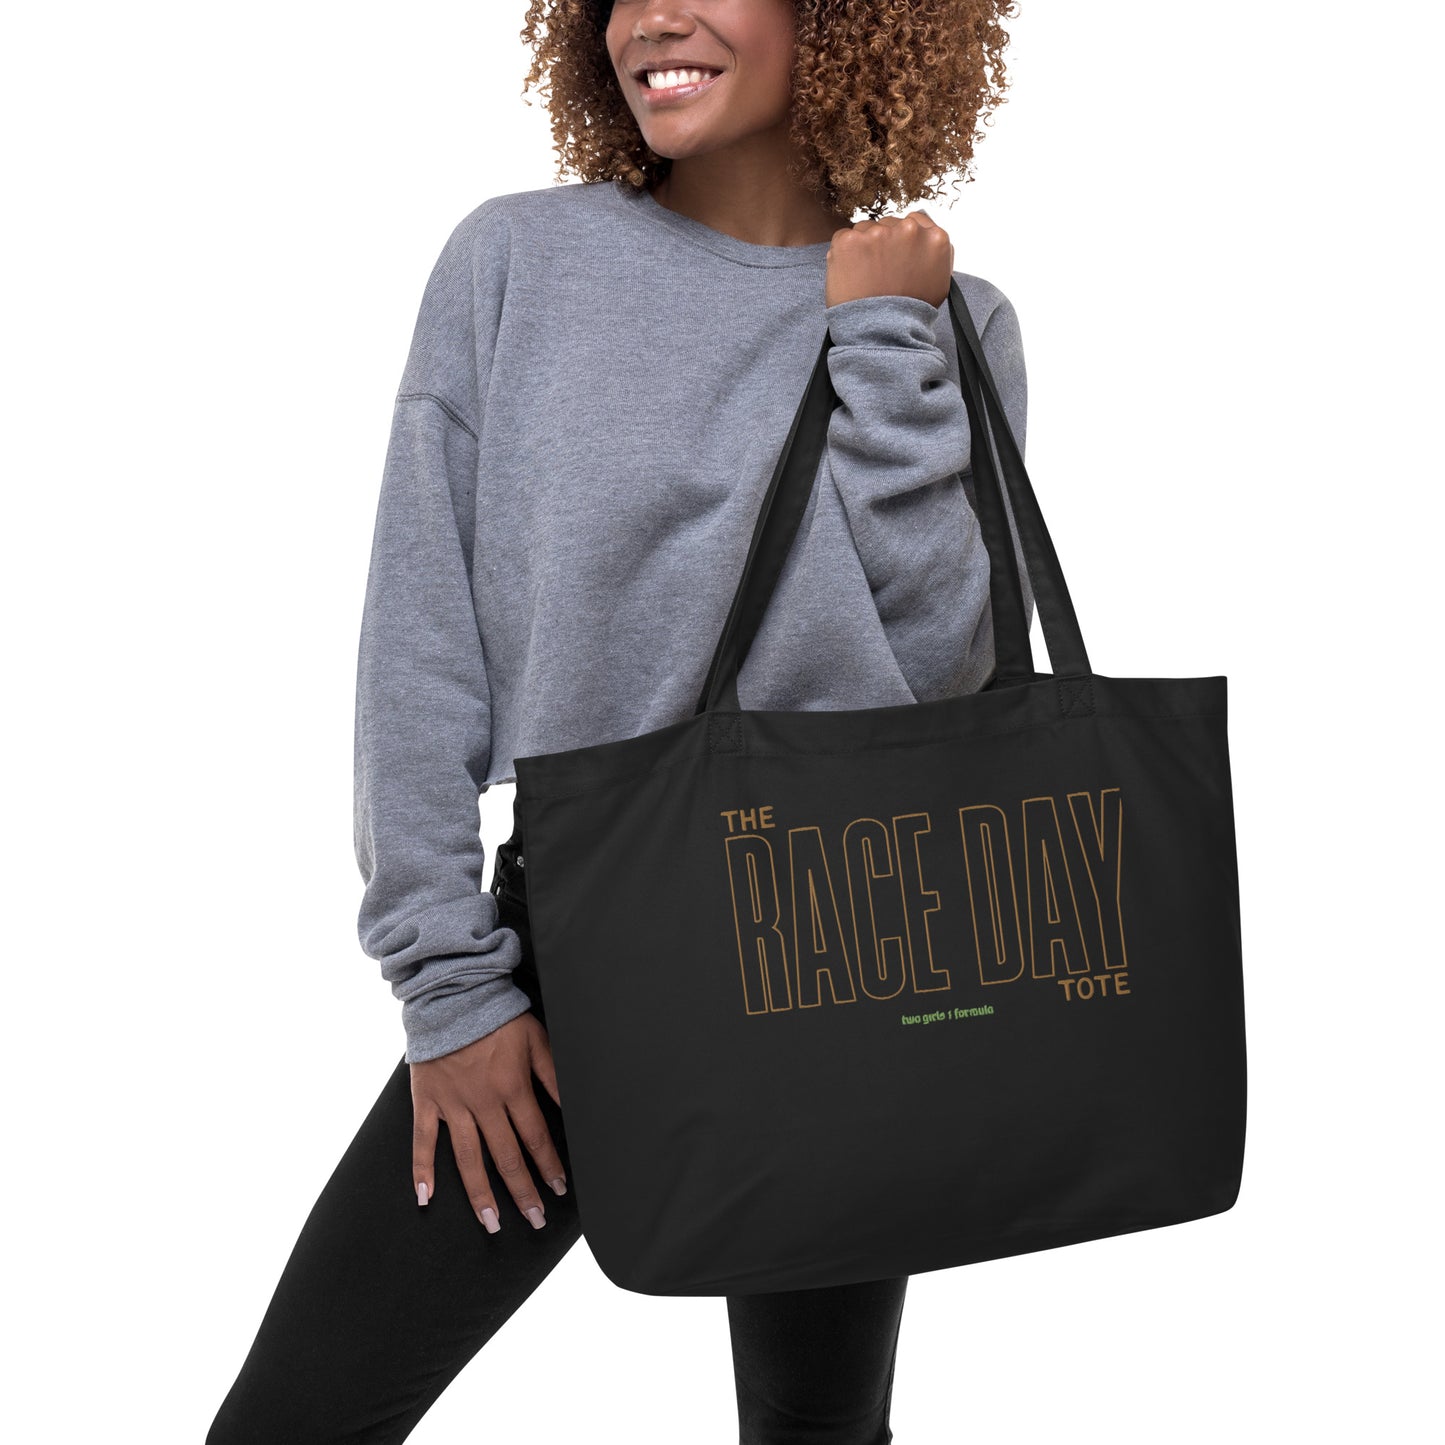 The Race Day Tote